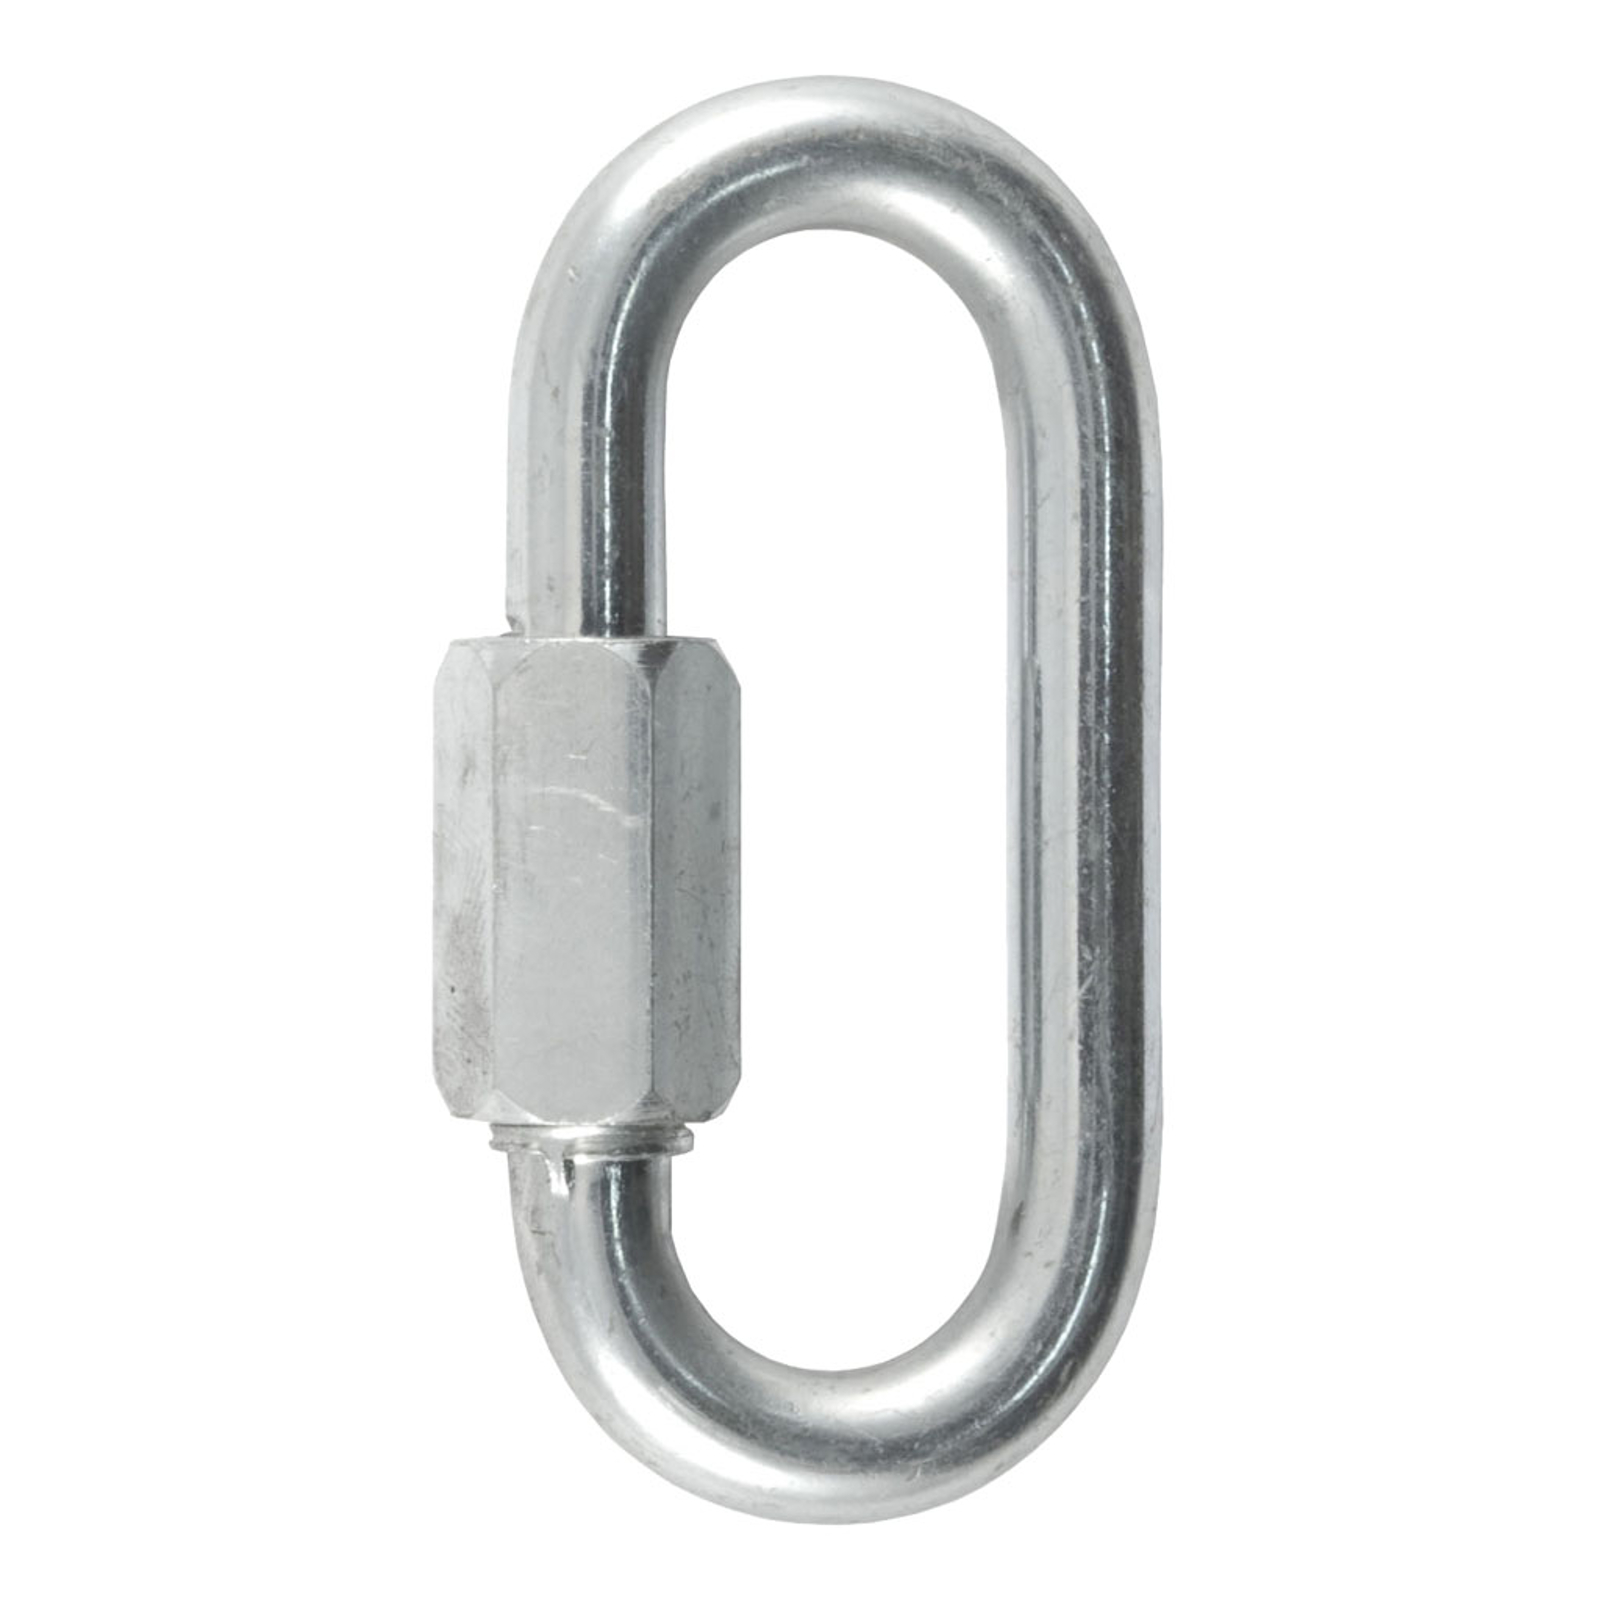 Safety Chain Quick Link